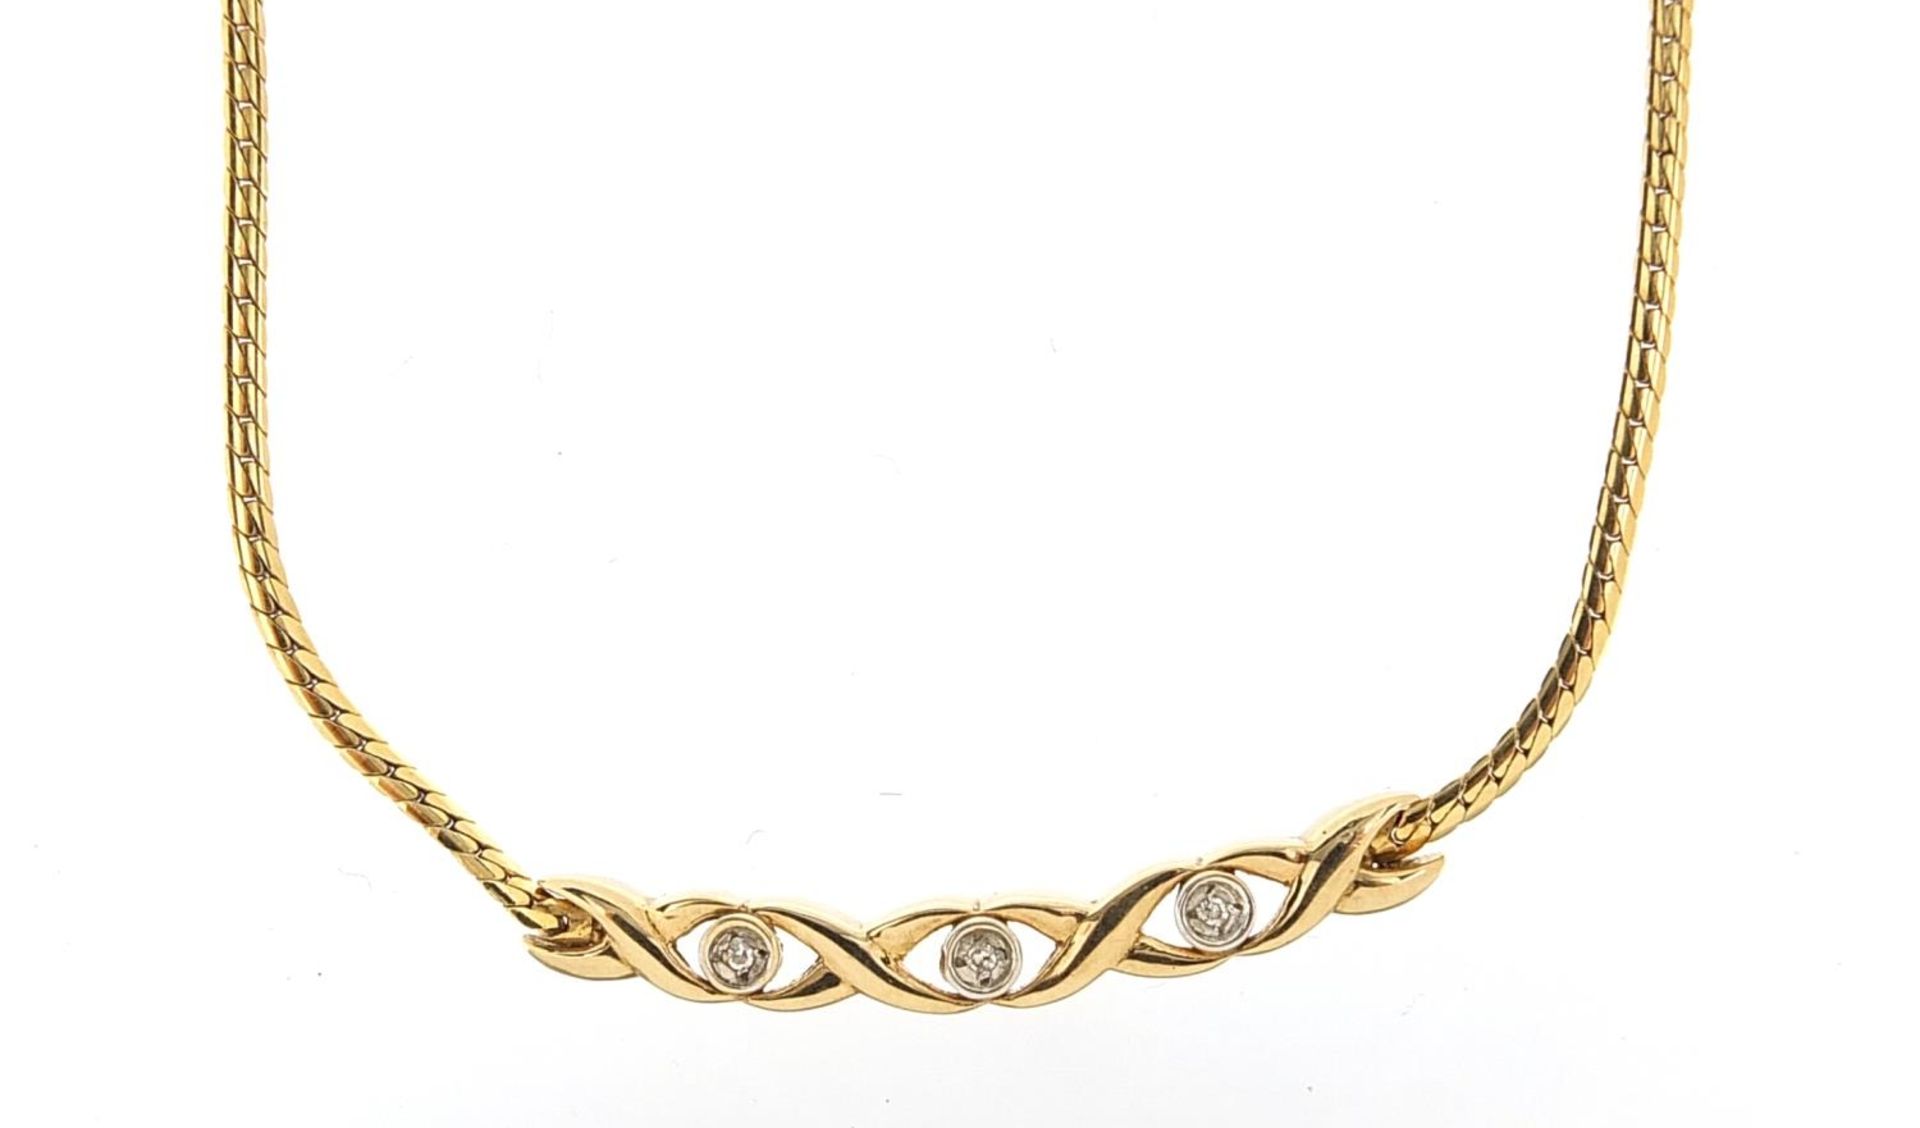 9ct gold necklace set with three diamonds, 41cm in length, 5.9g